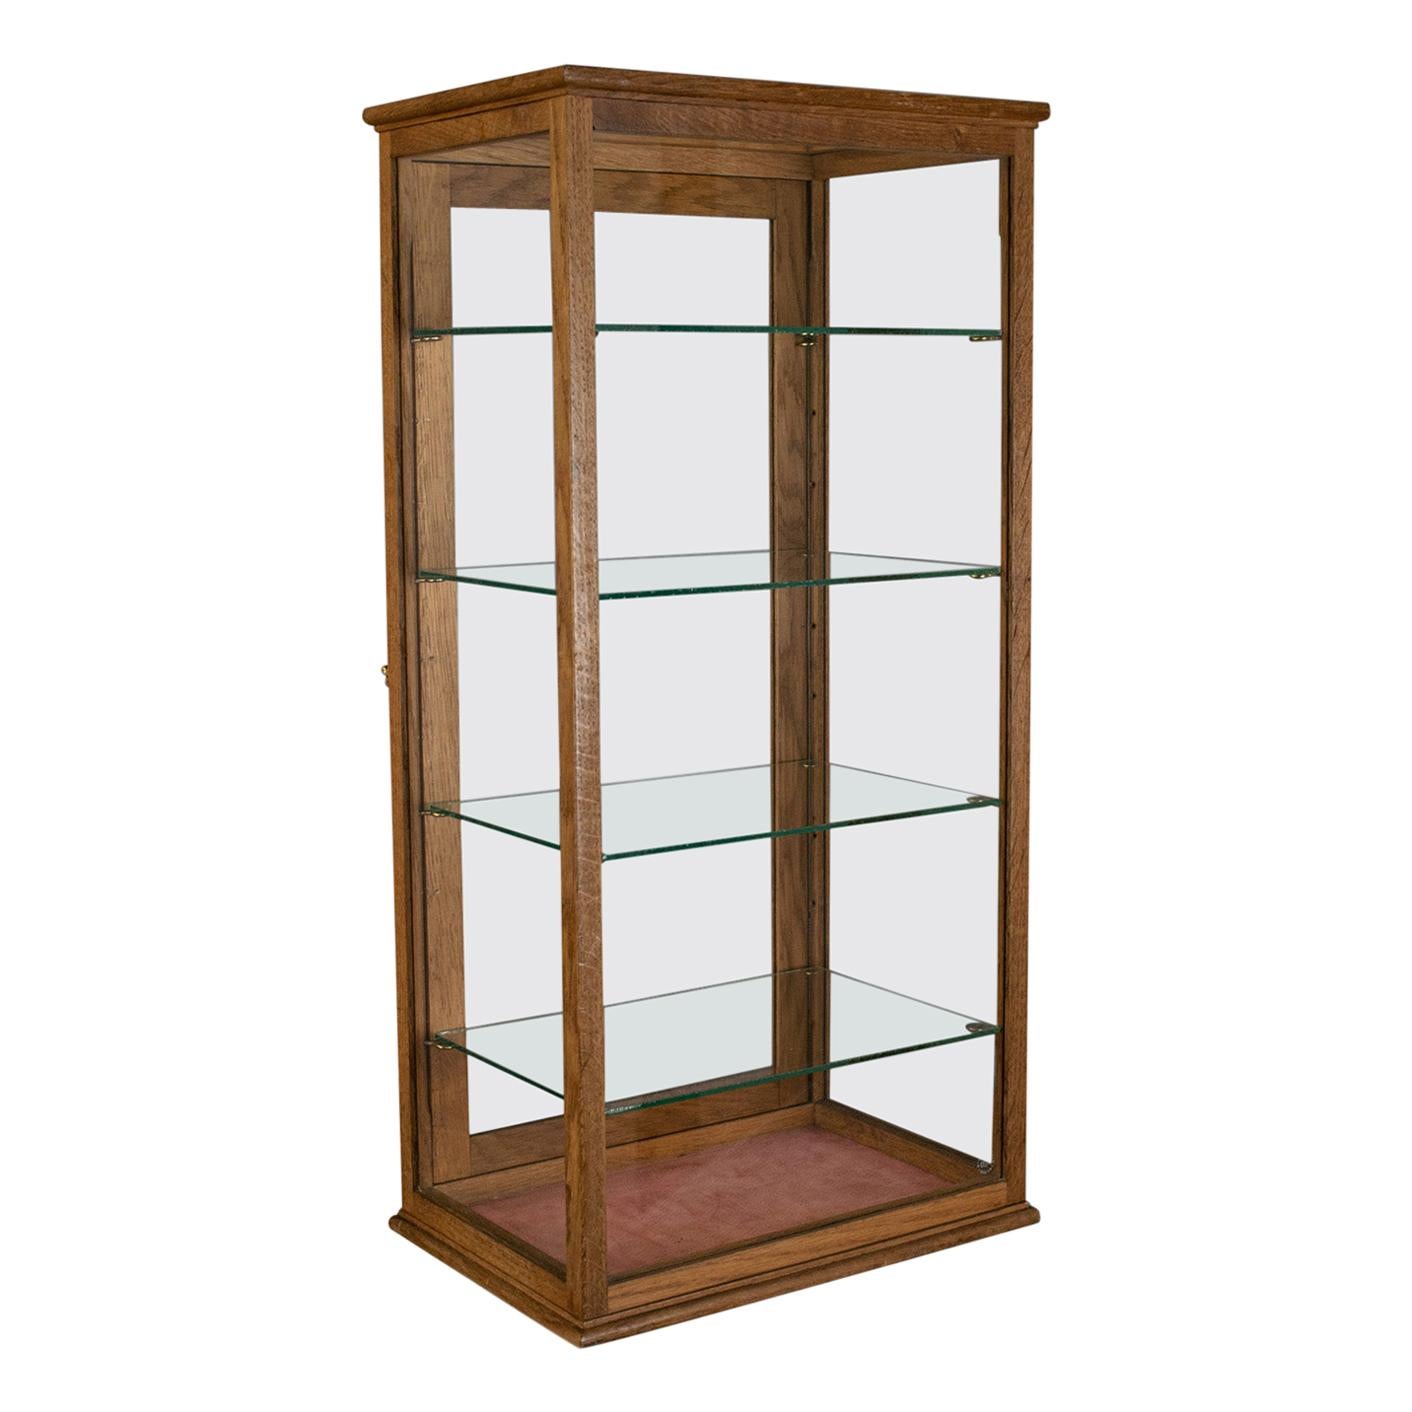 Antique Display Cabinet, Glass Shelves, English, Late 19th Century, Oak